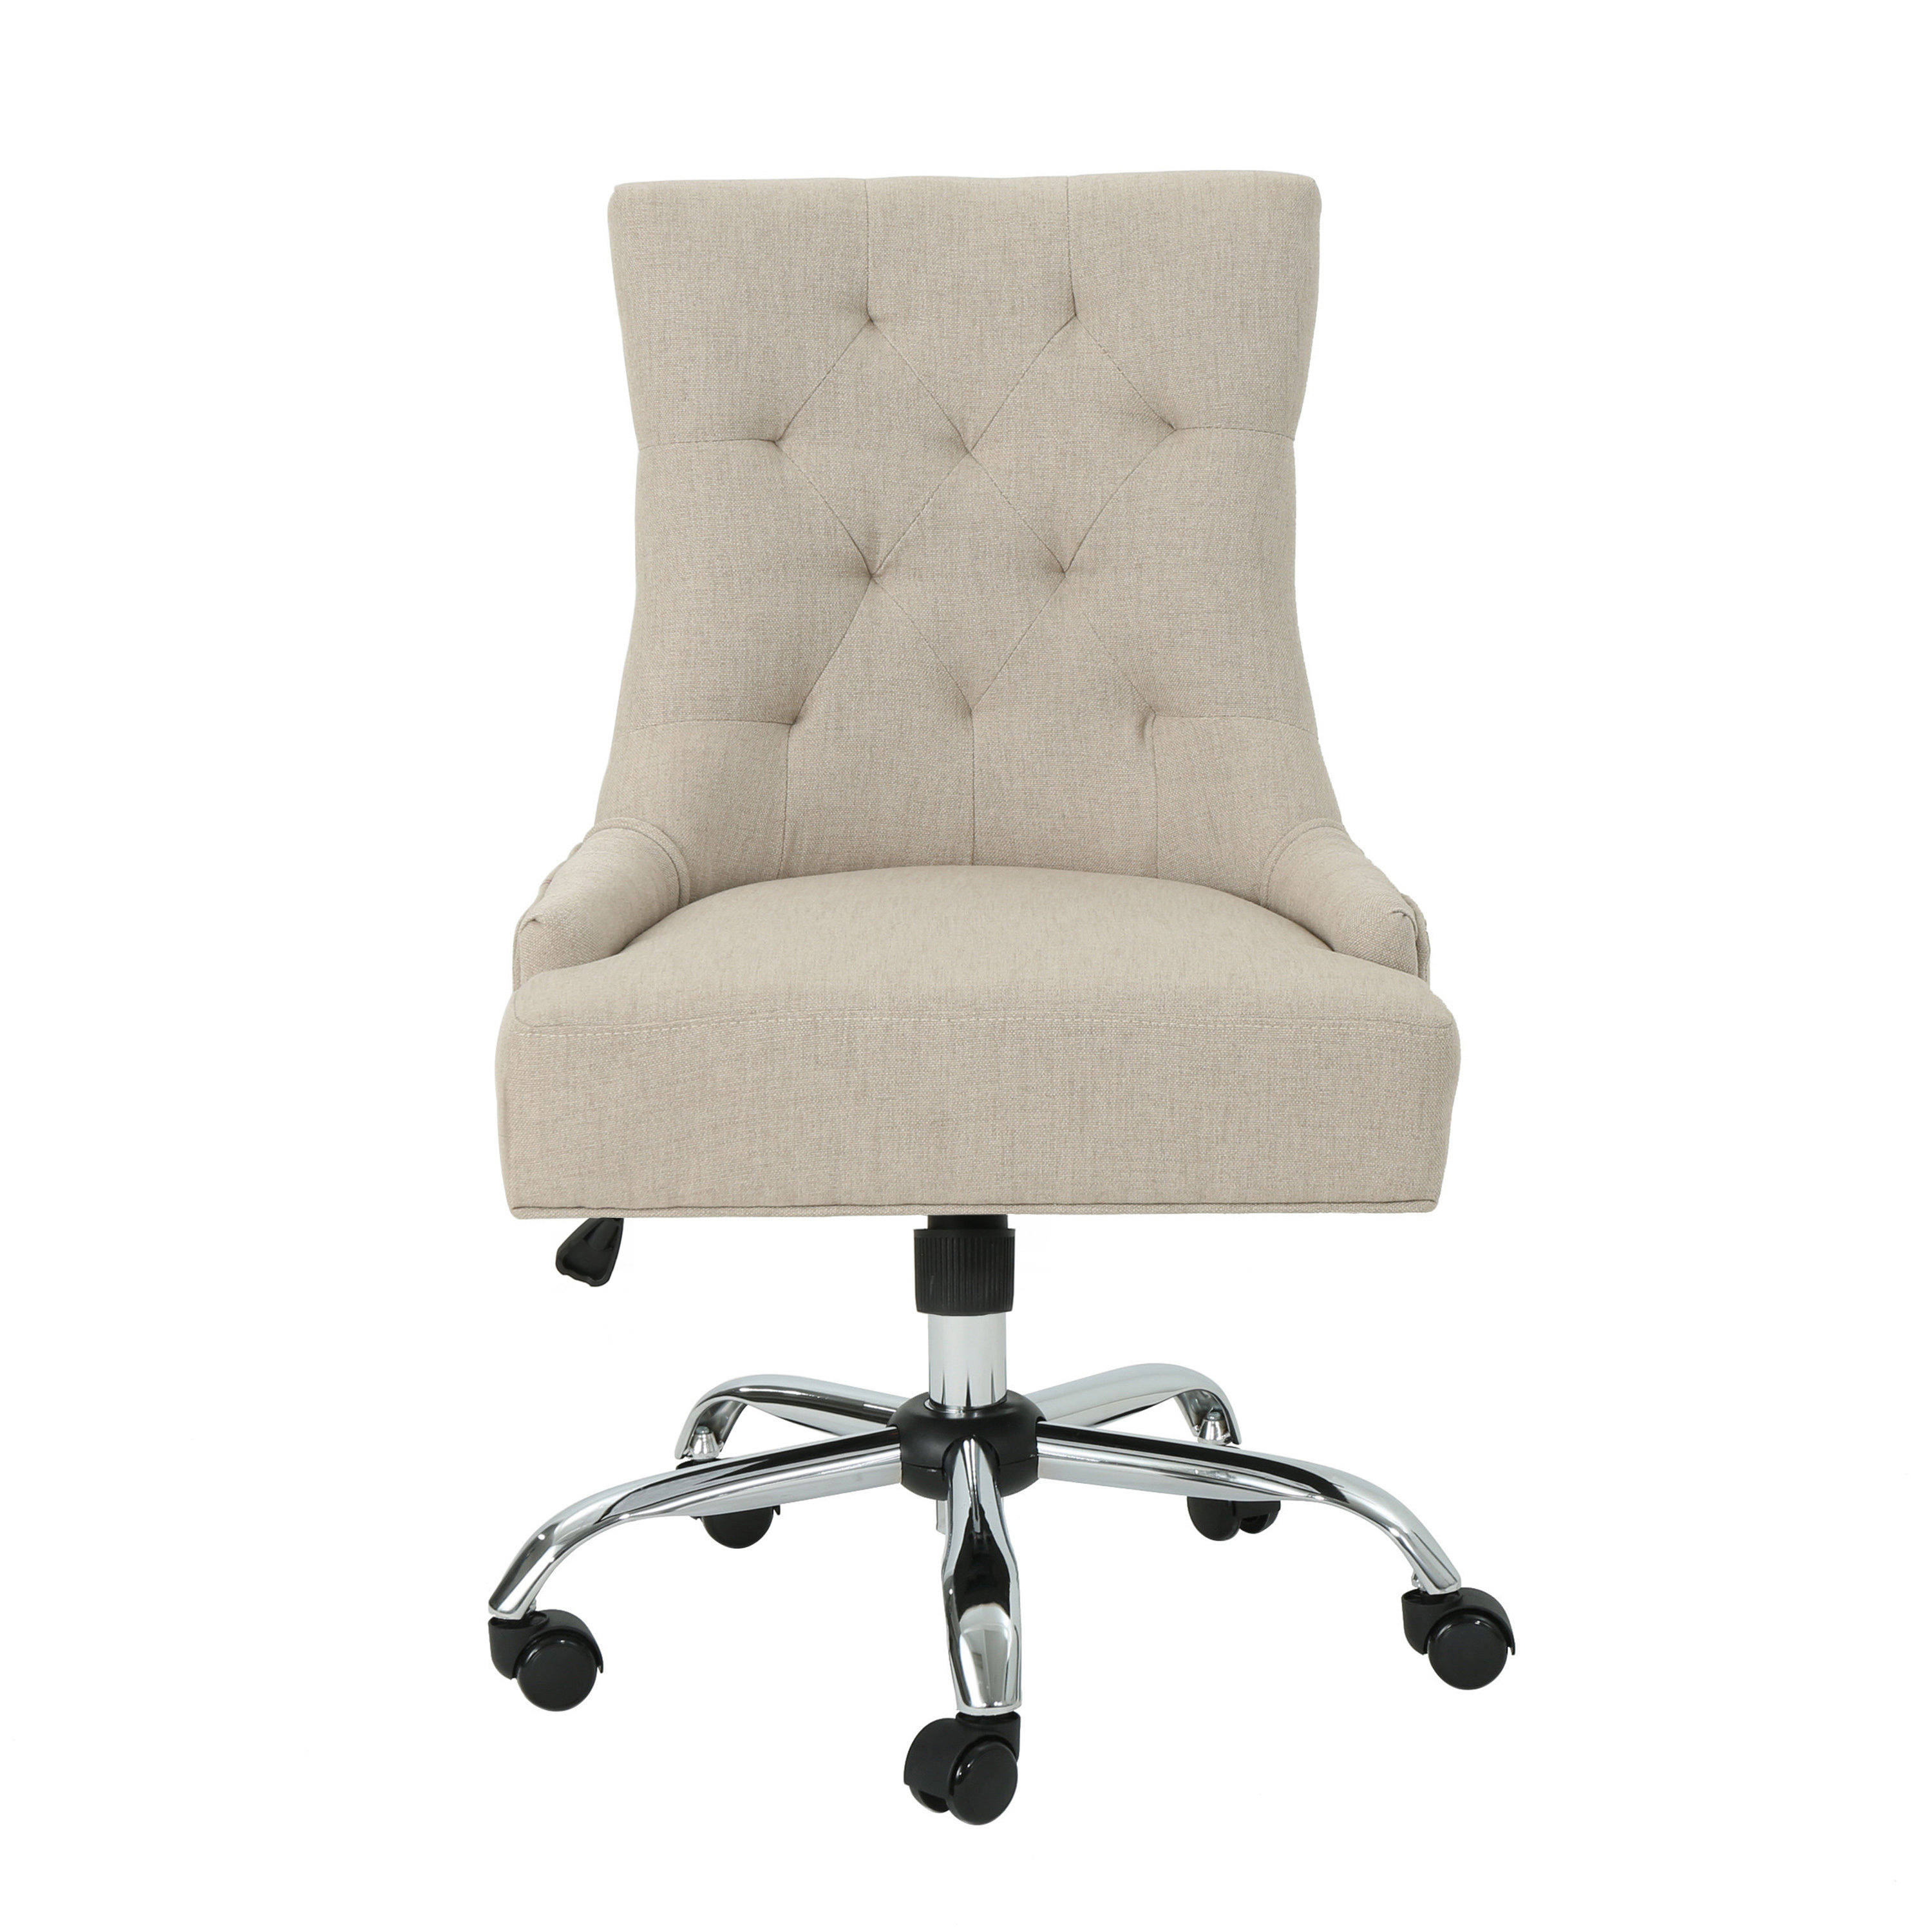 Beaussicot Polyester Task Chair Wade Logan Fabric: Yellow Polyester